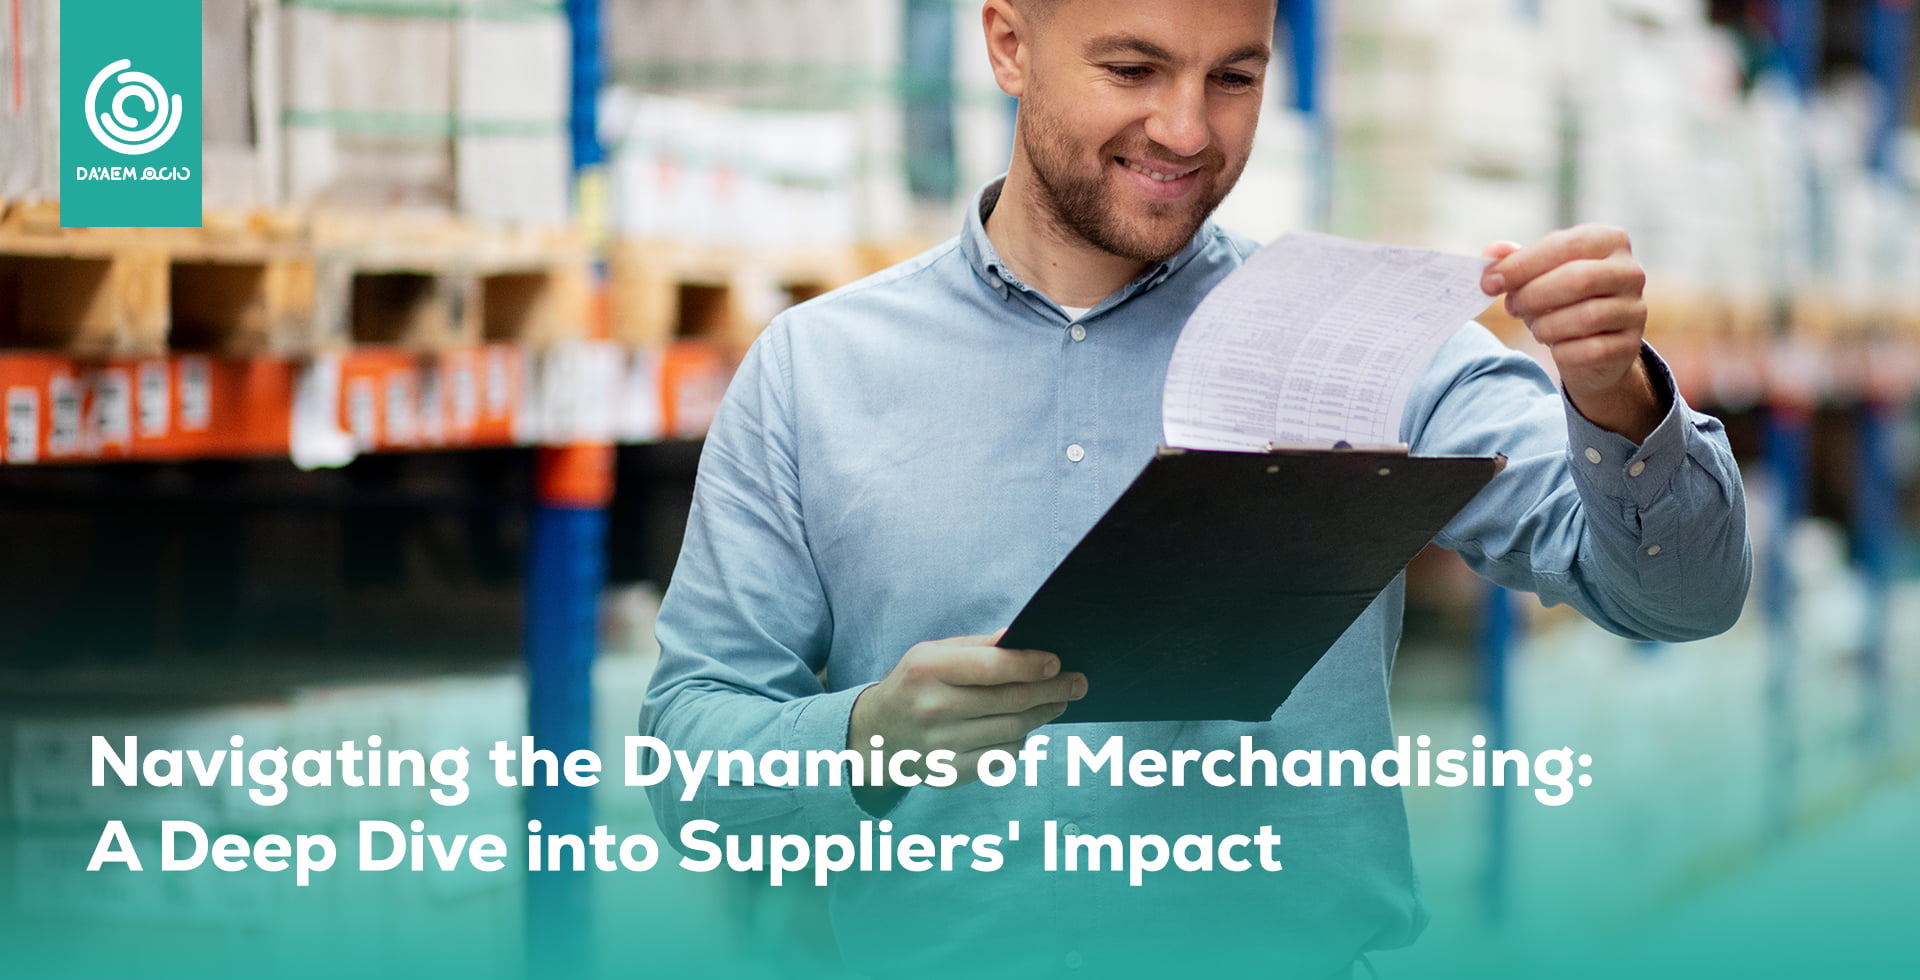 Navigating the Awesome Dynamics of Merchandising: A Deep Dive into Suppliers’ Impact